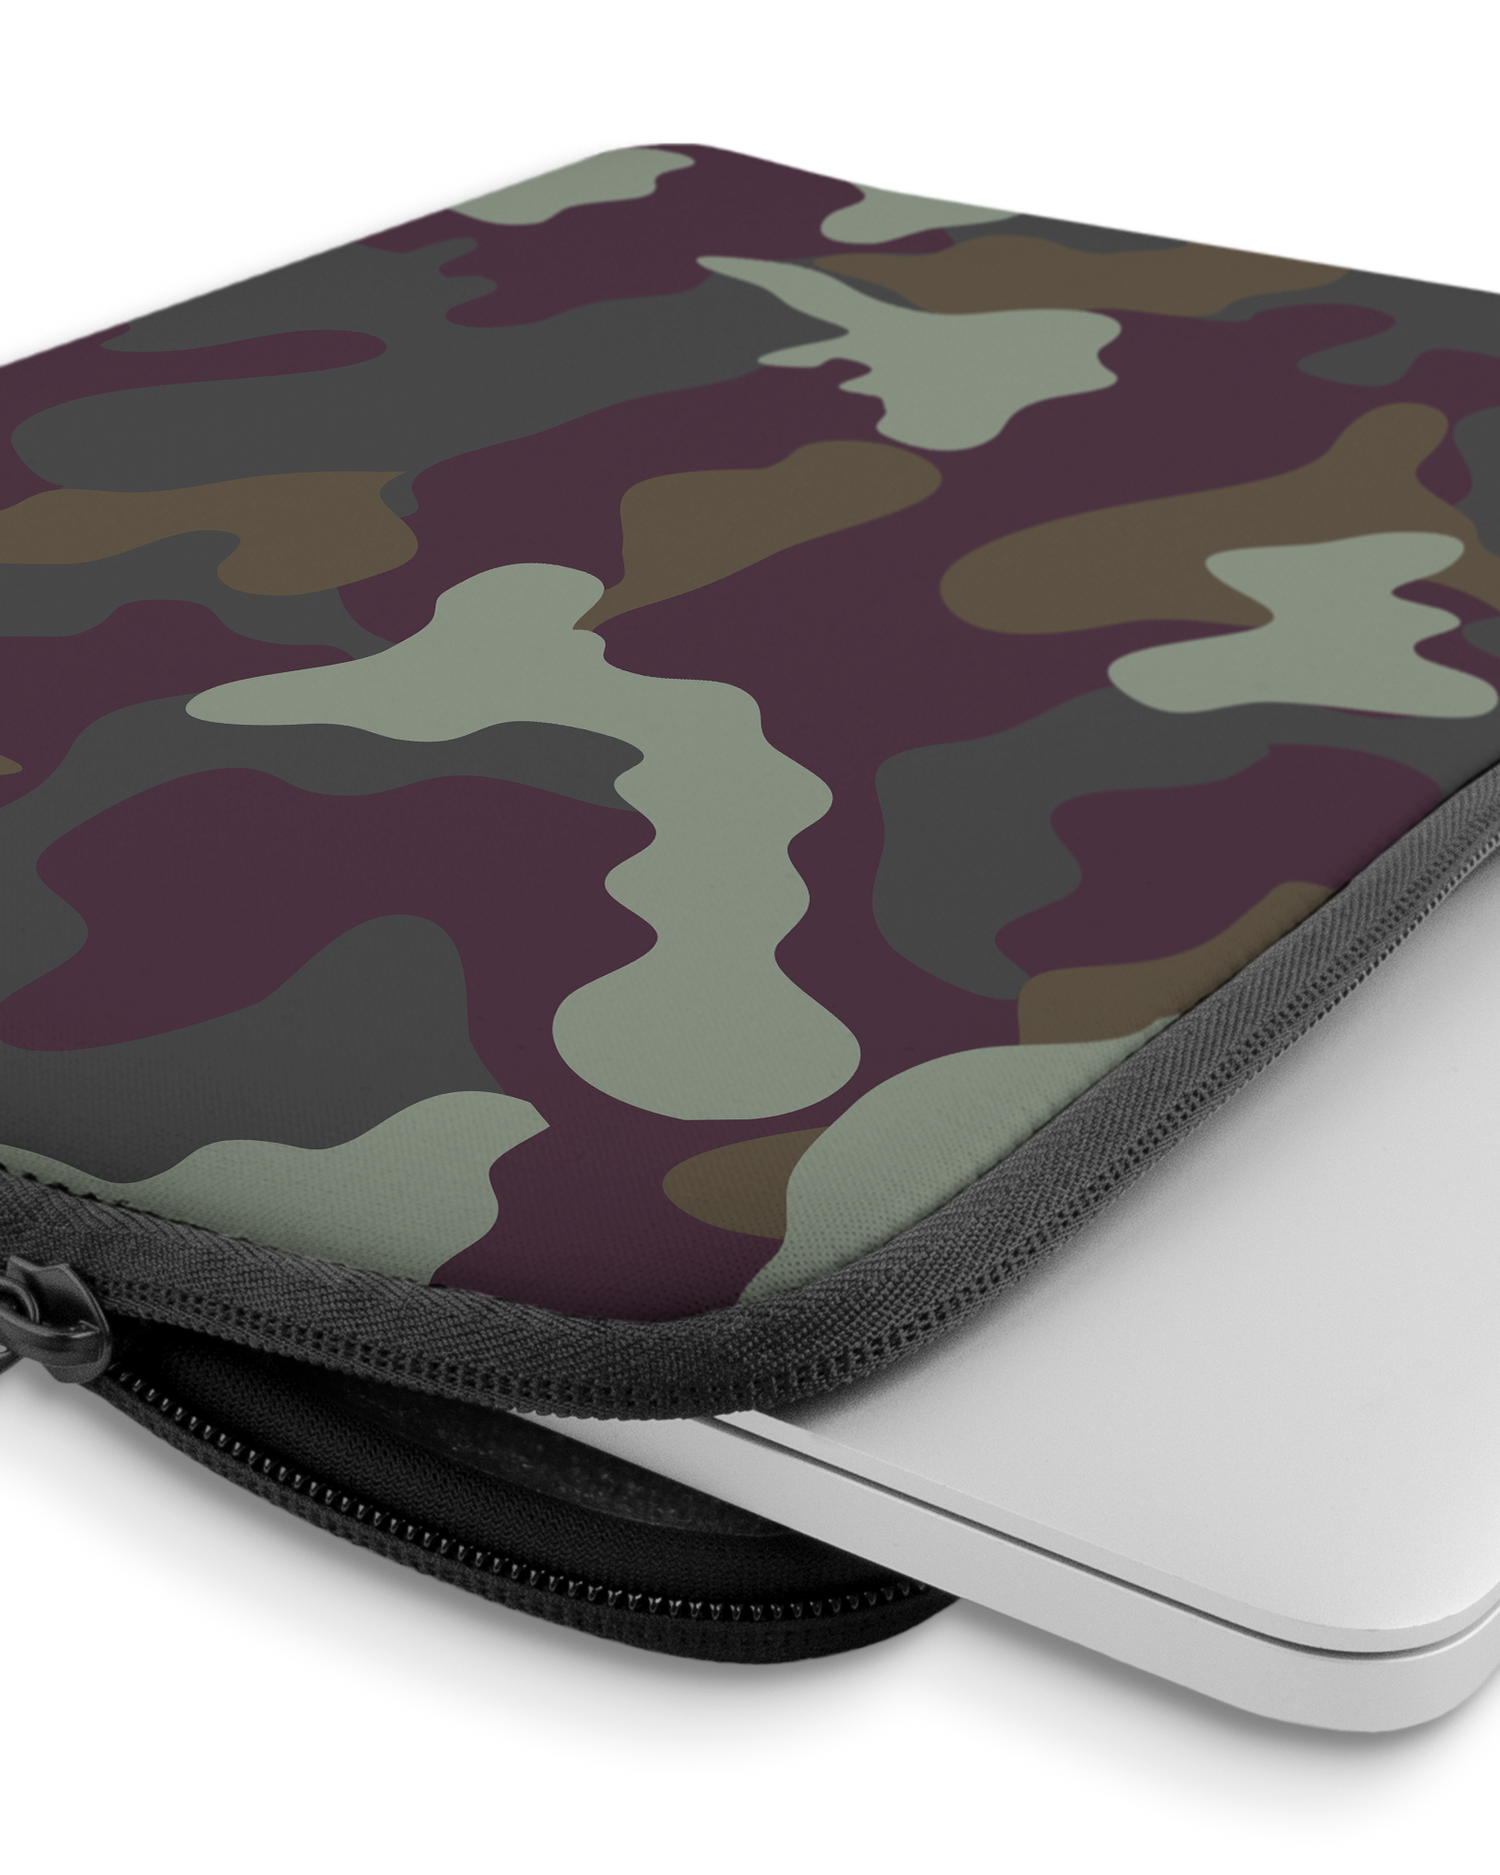 Night Camo Laptop Case 13-14 inch with device inside